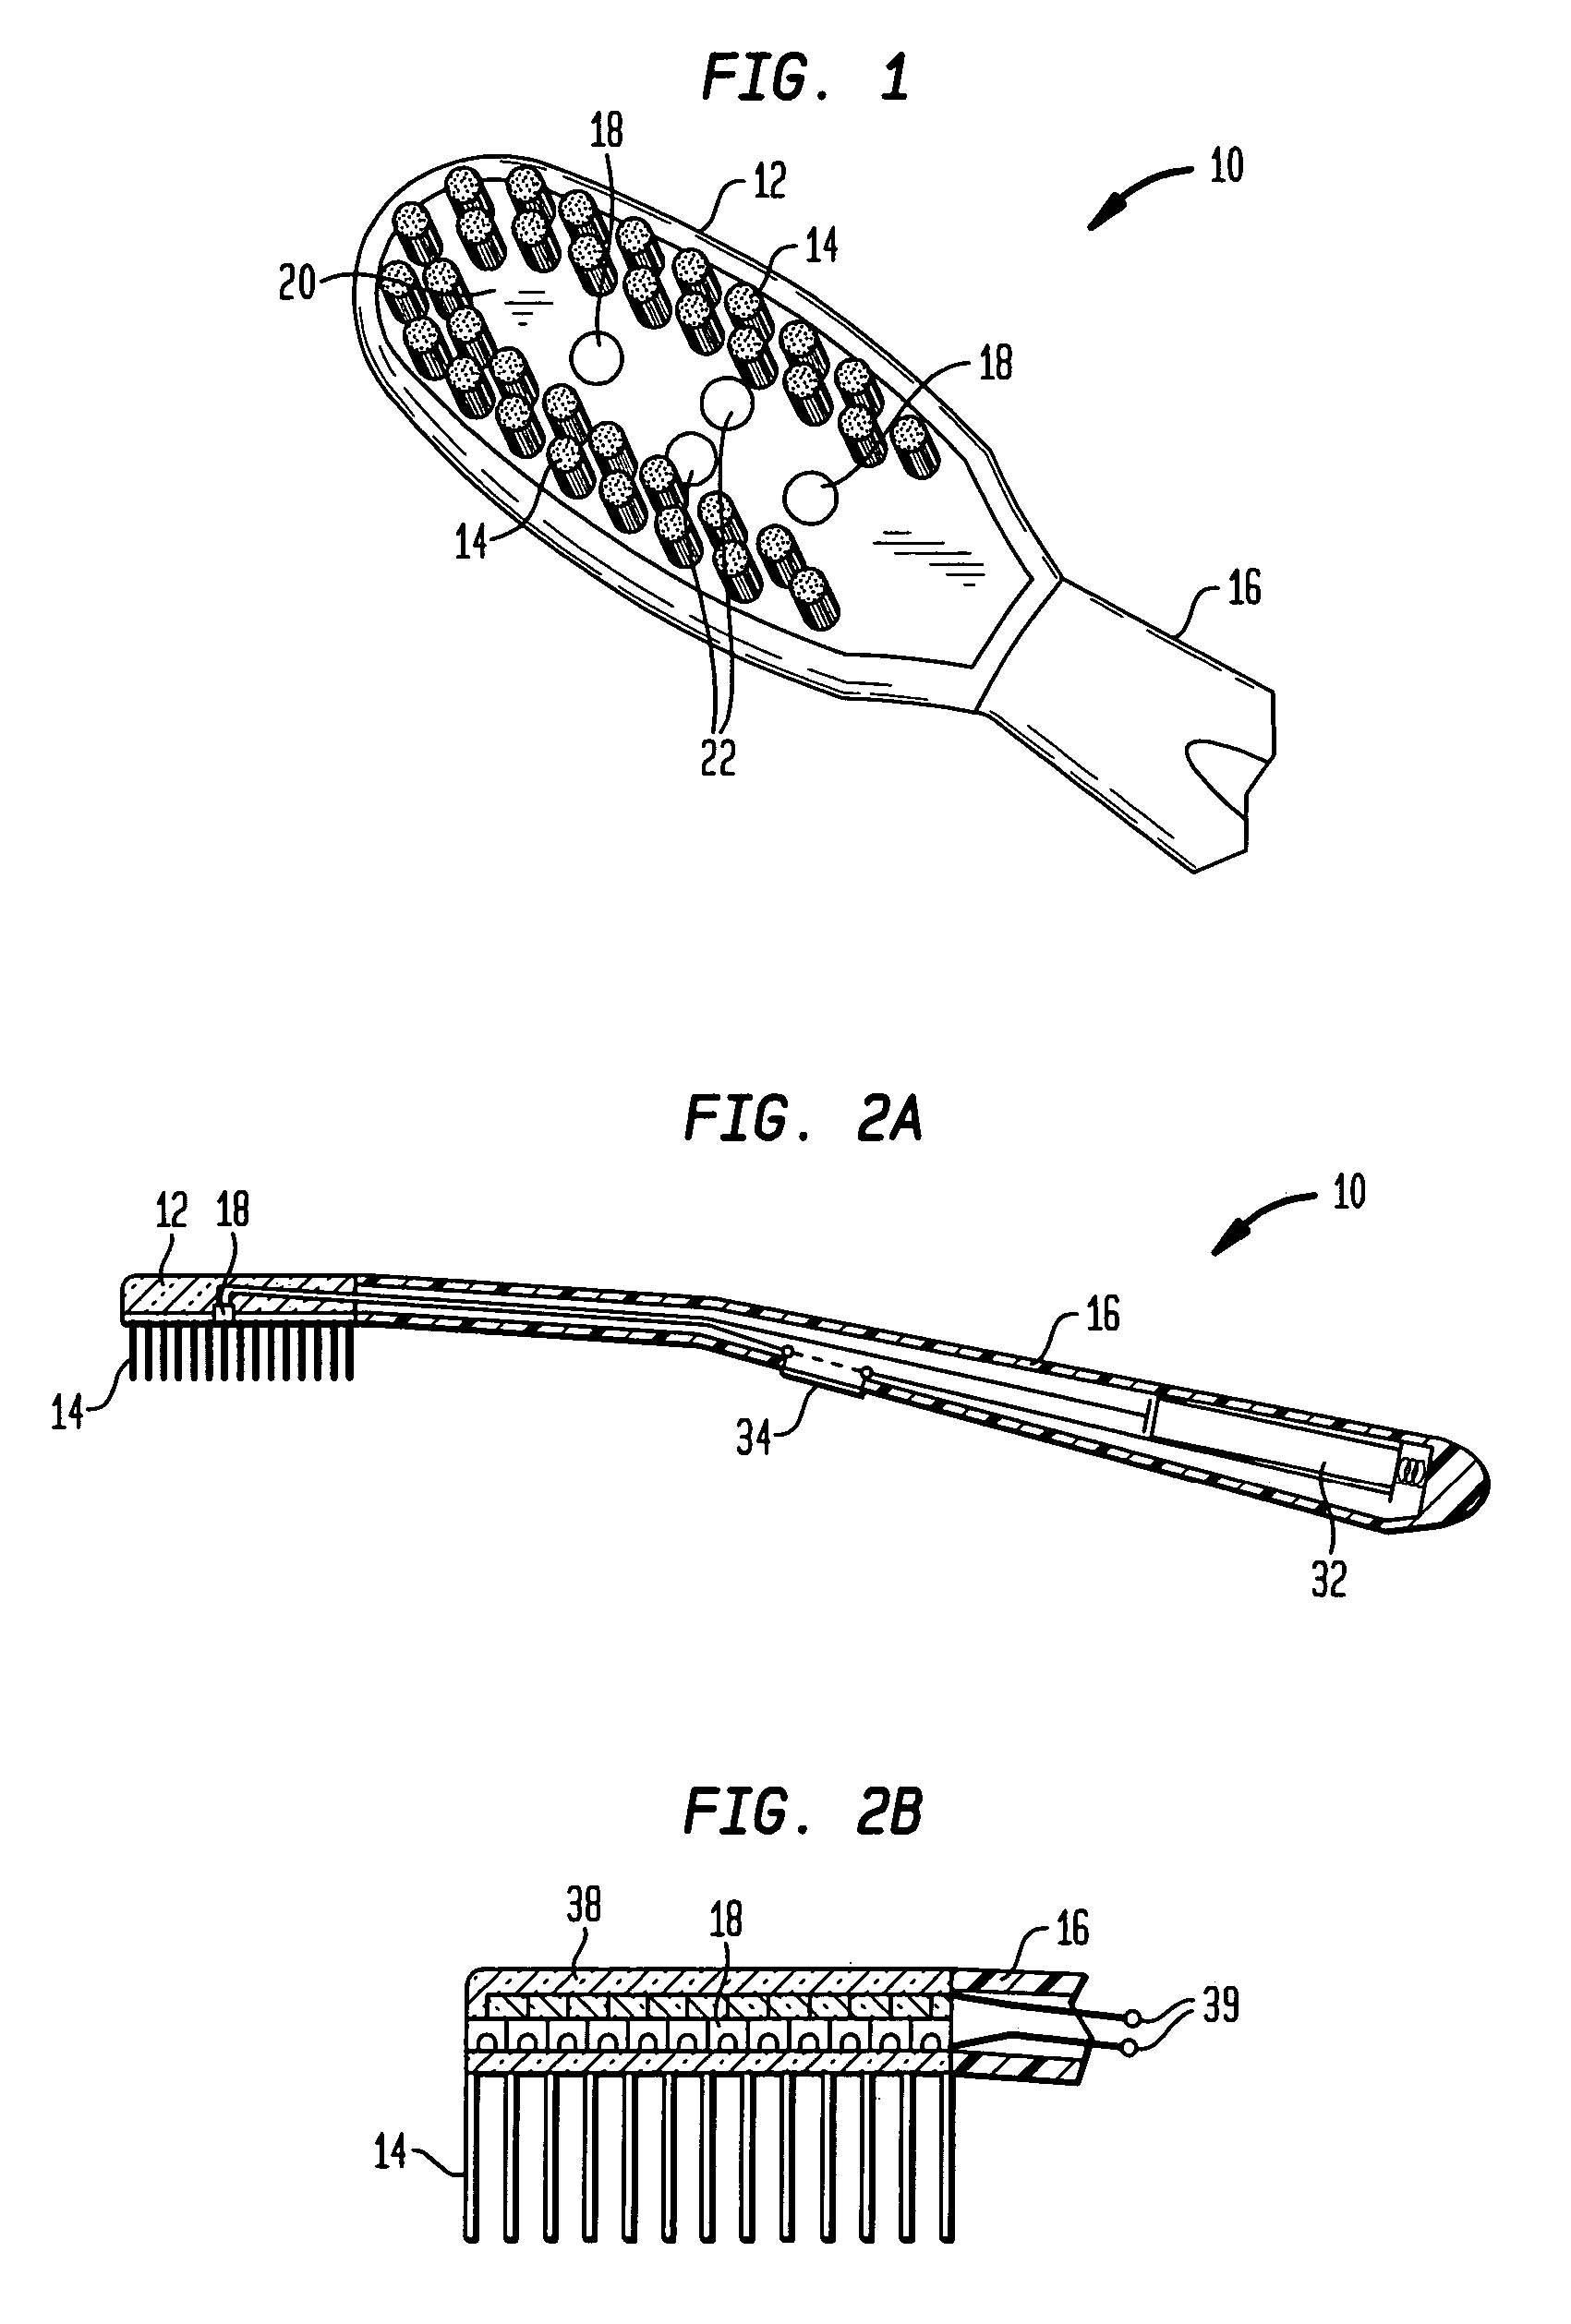 Multi-directional oral phototherapy applicator